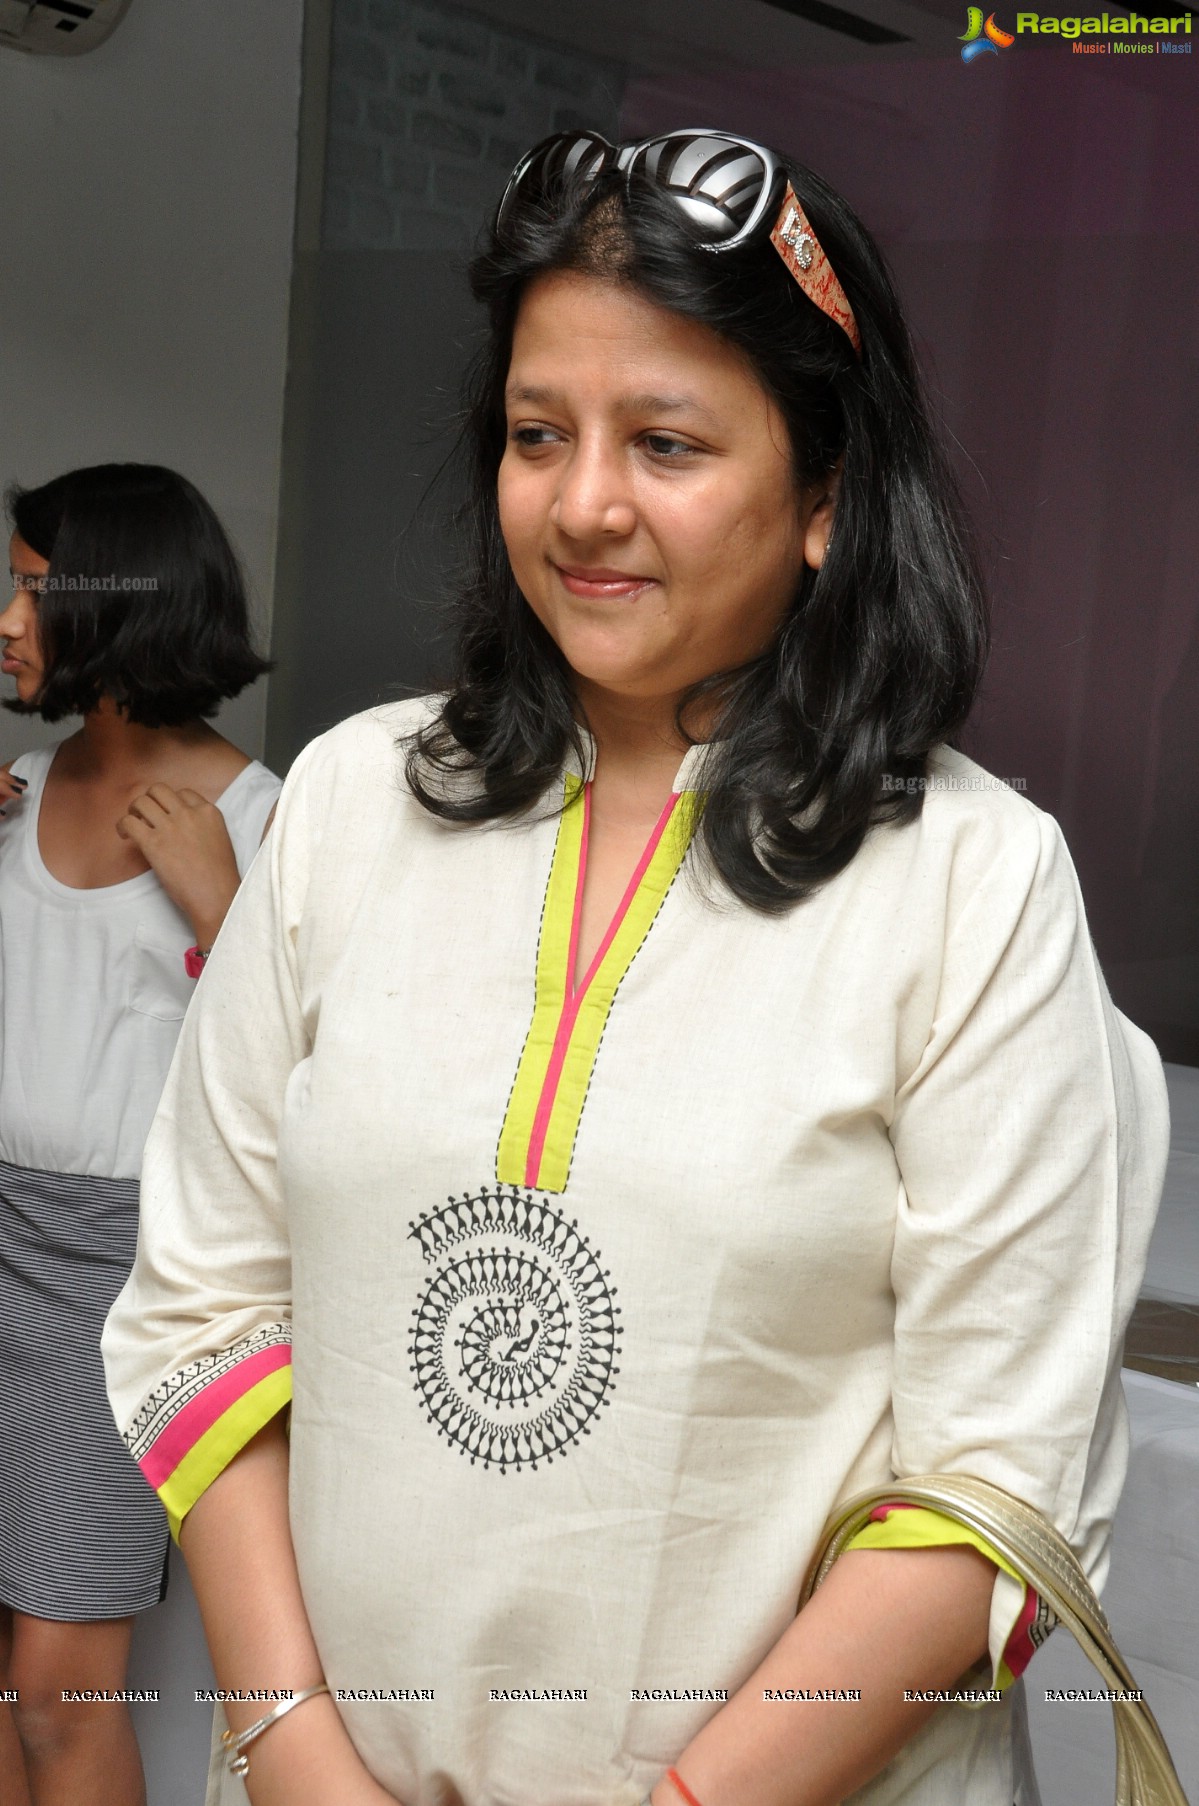 Radhika Agarwal's Lifestyle Products Sale at Coffee Affairs, Hyderabad